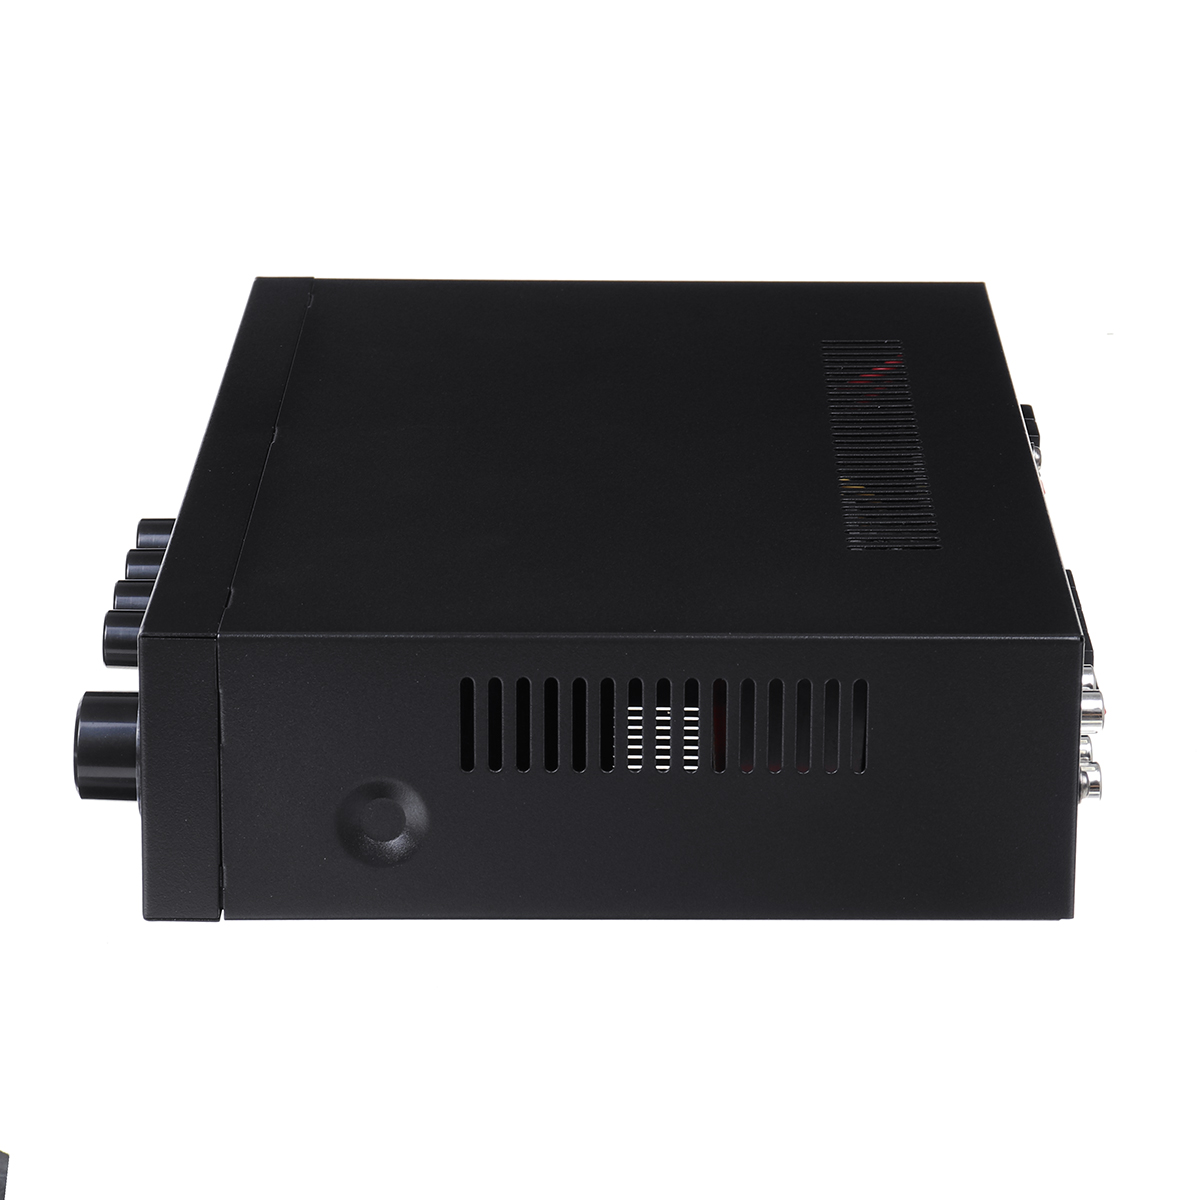 Find 1000W HIFI Power Amplifiers Stereo Audio Bluetooth Amplifier Car Home Theater Sound 220V for Sale on Gipsybee.com with cryptocurrencies